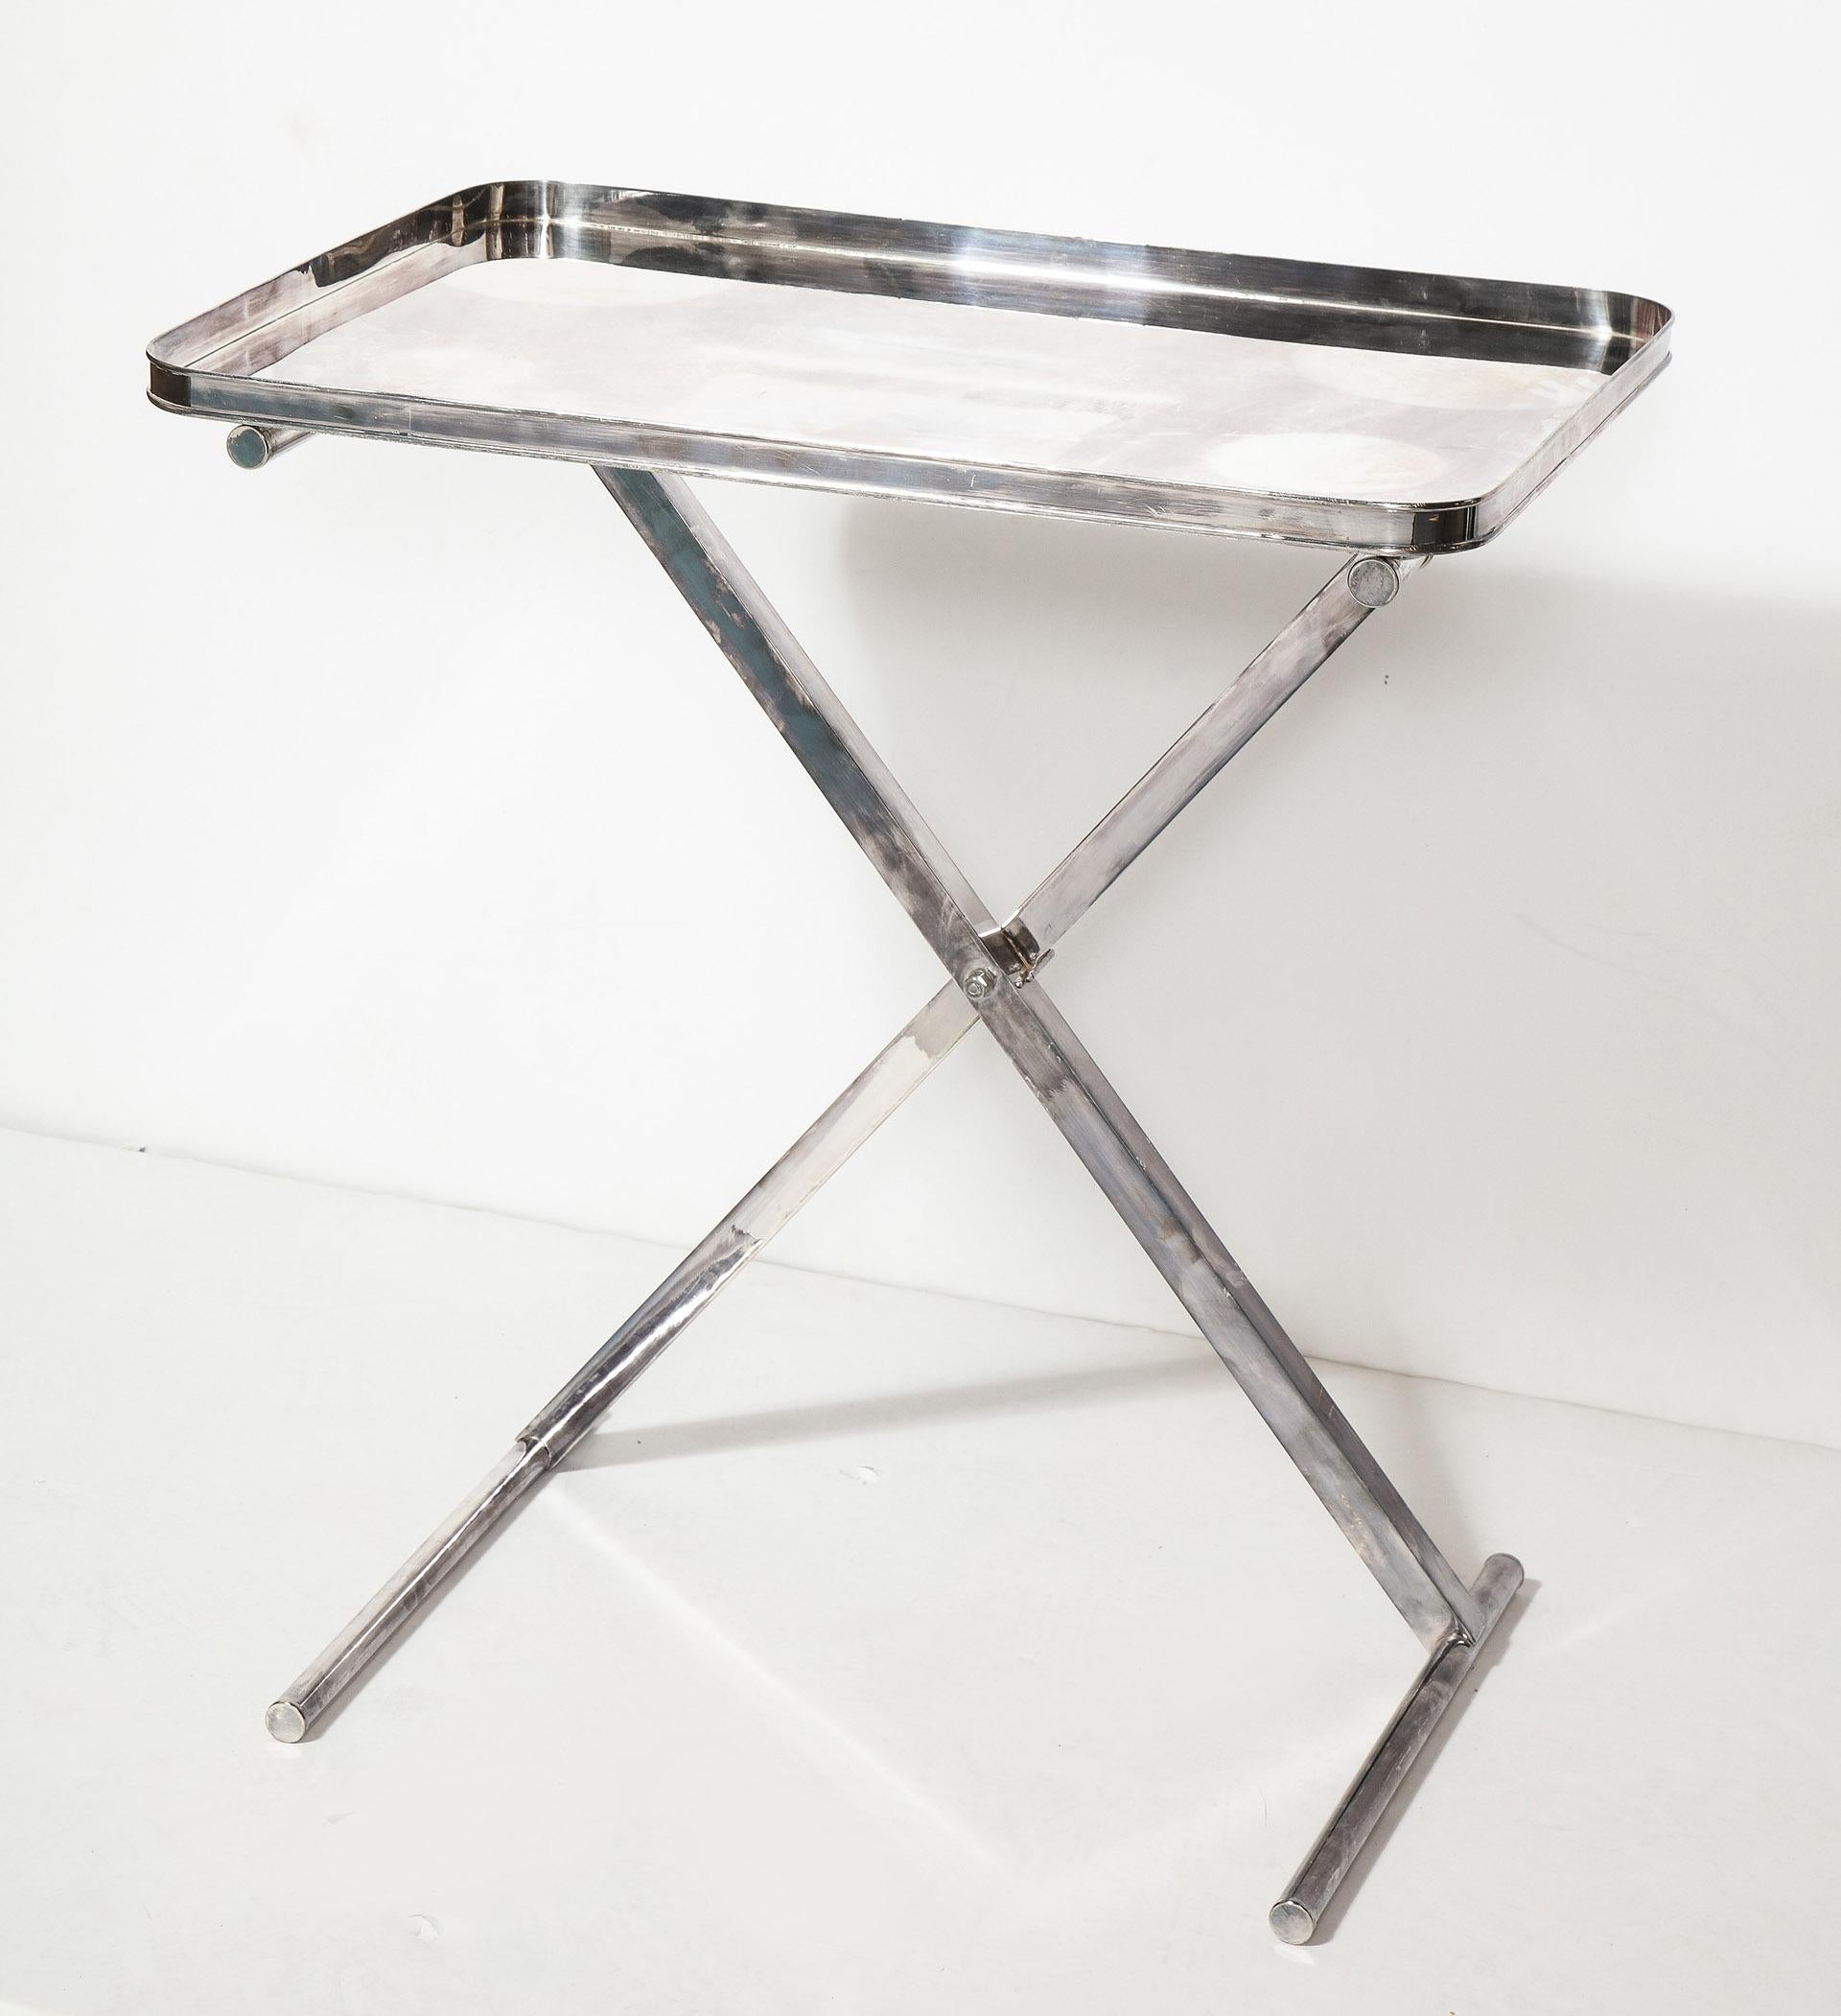 Large silver plate tray with X-form stand

The English silver plate tray supported by a silver plate stand.